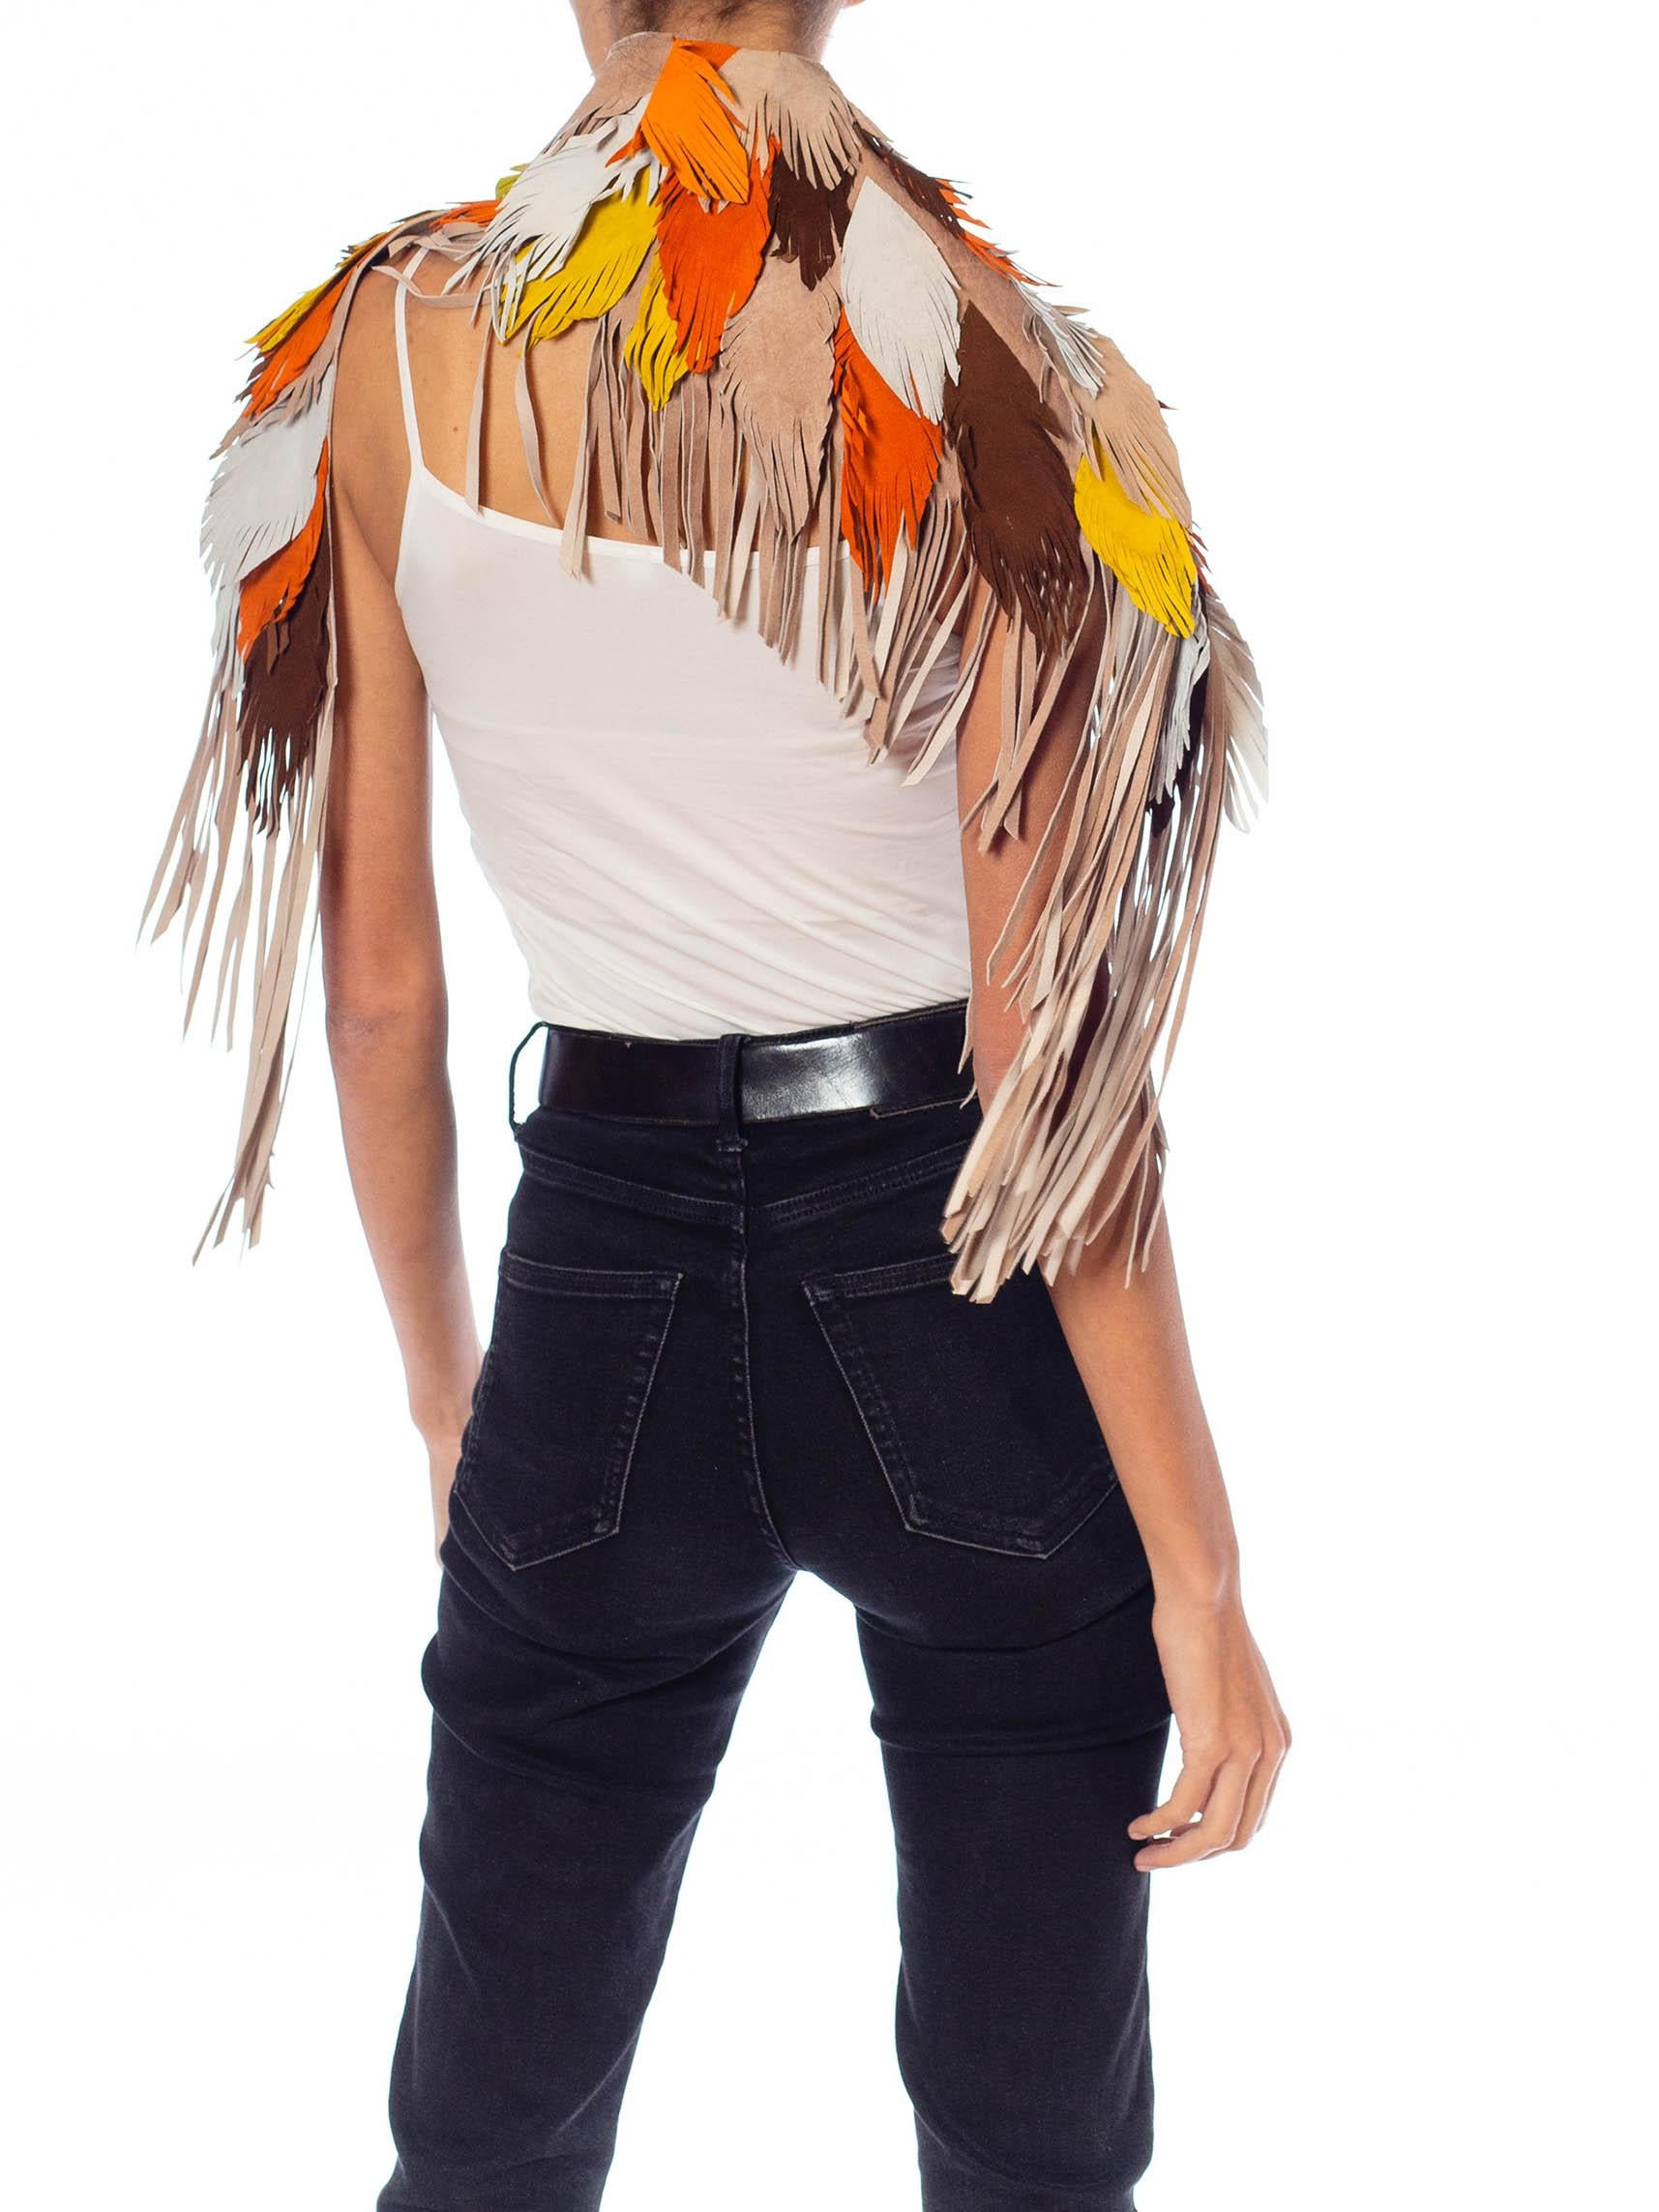 MORPHEW COLLECTION Phoenix Sunset Suede Fringe Feather Leather Cape For Sale 6